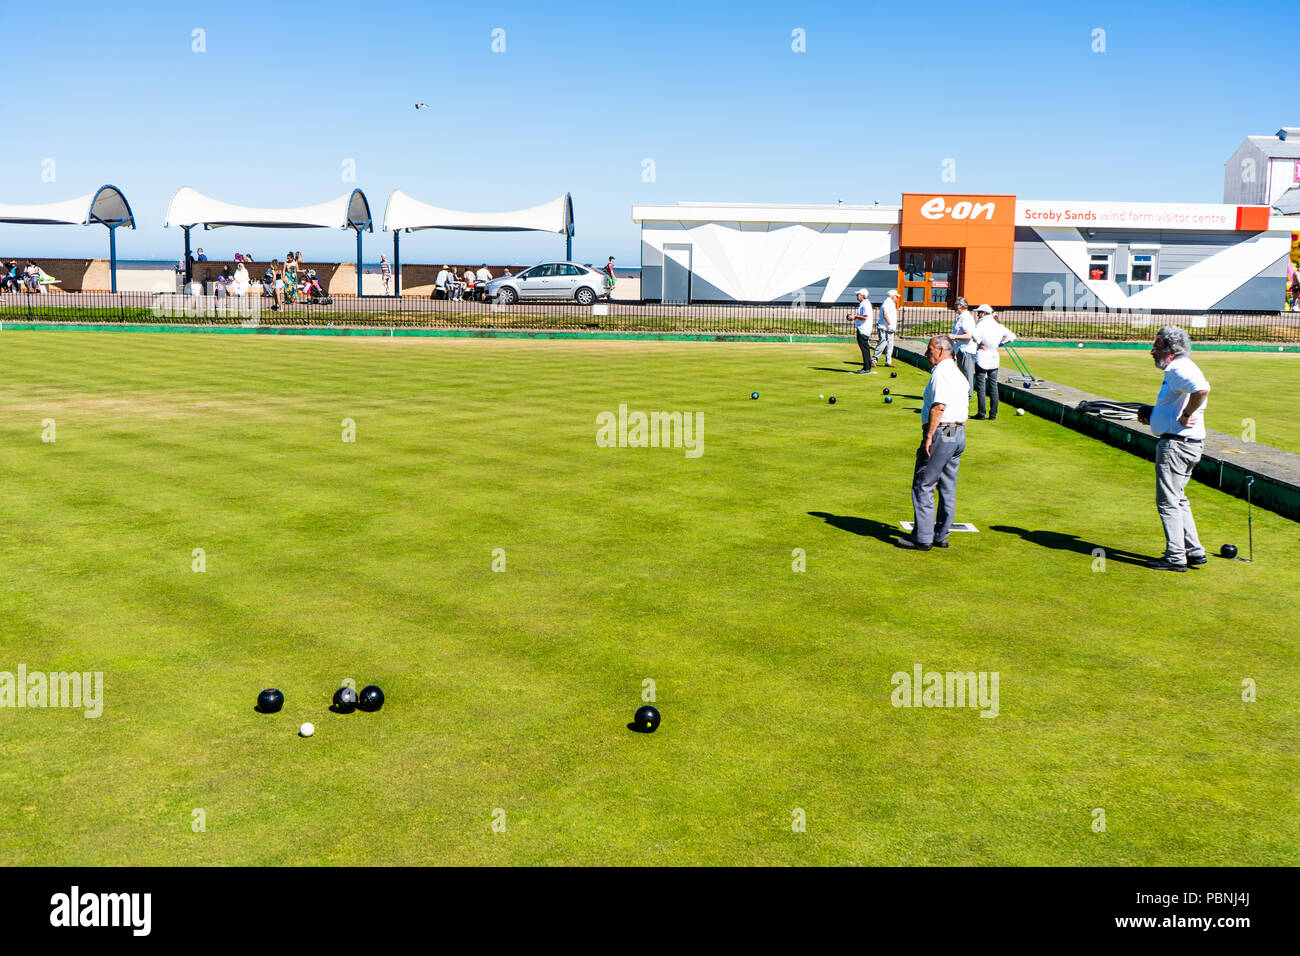 Men playing bowls at the bowling club  Greate Yarmouth, England. Bowls Tournaments in Greater Yarmouth.The bowling green. Stock Photo